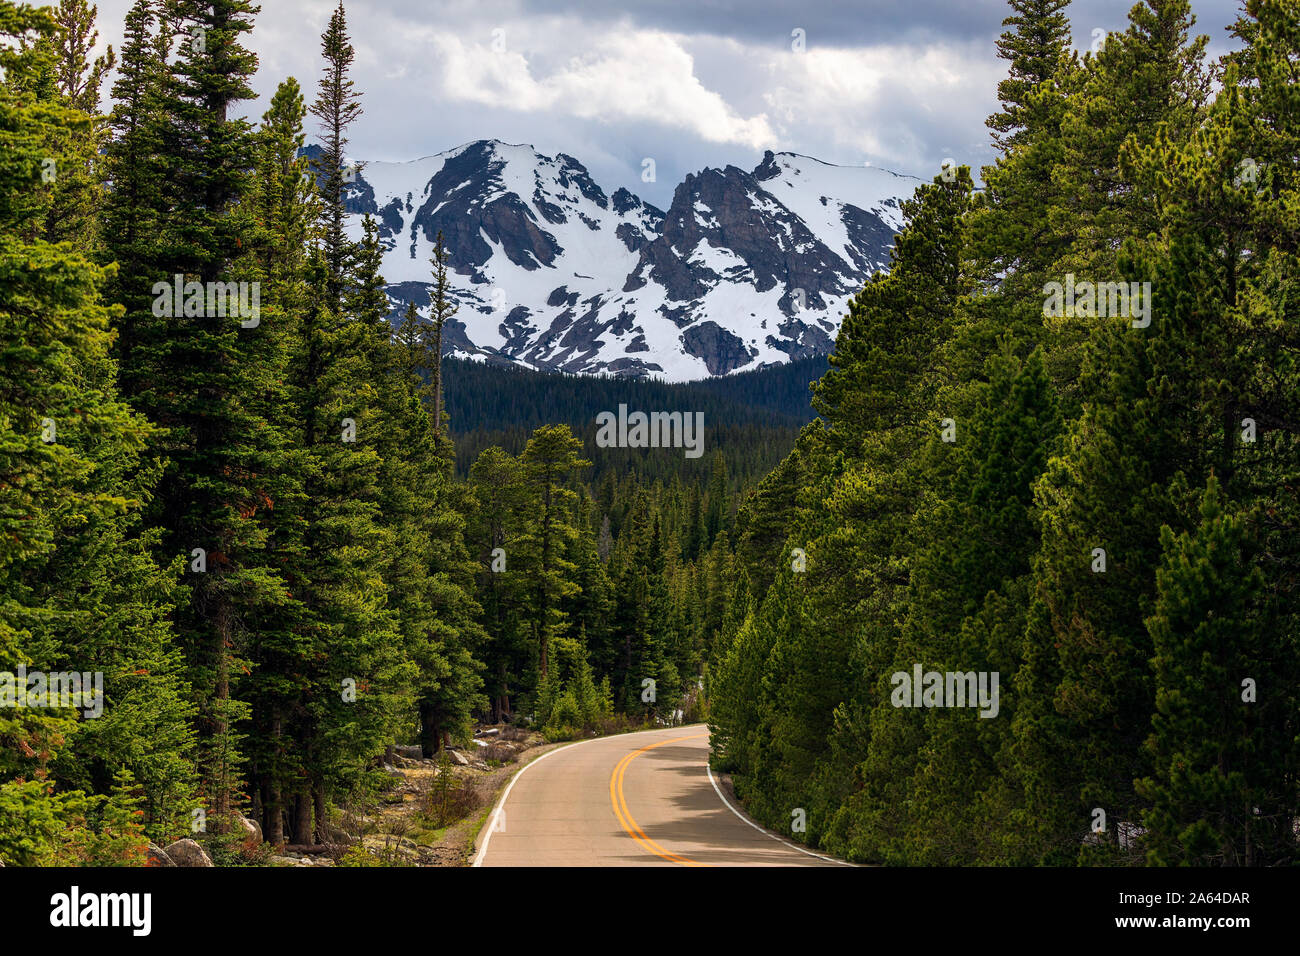 A winding road leads through the forest to Indian Peaks Wilderness in the Rocky Mountains near Ward, Colorado, USA Stock Photo